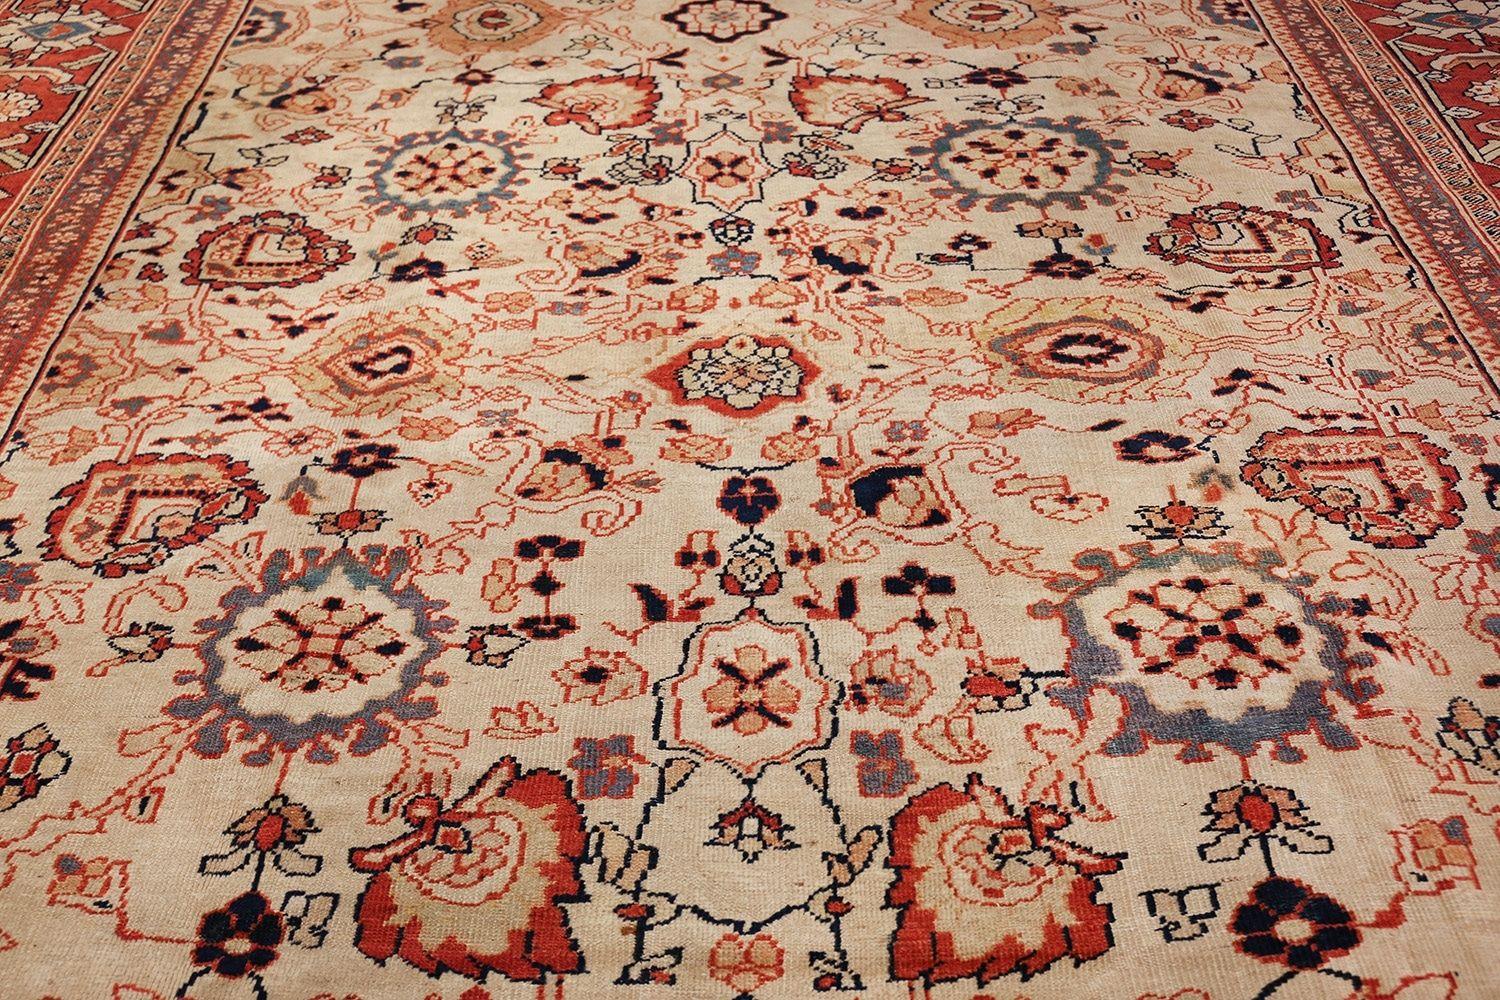 19th Century Antique Persian Sultanabad Rug. Size: 11' x 14' 4